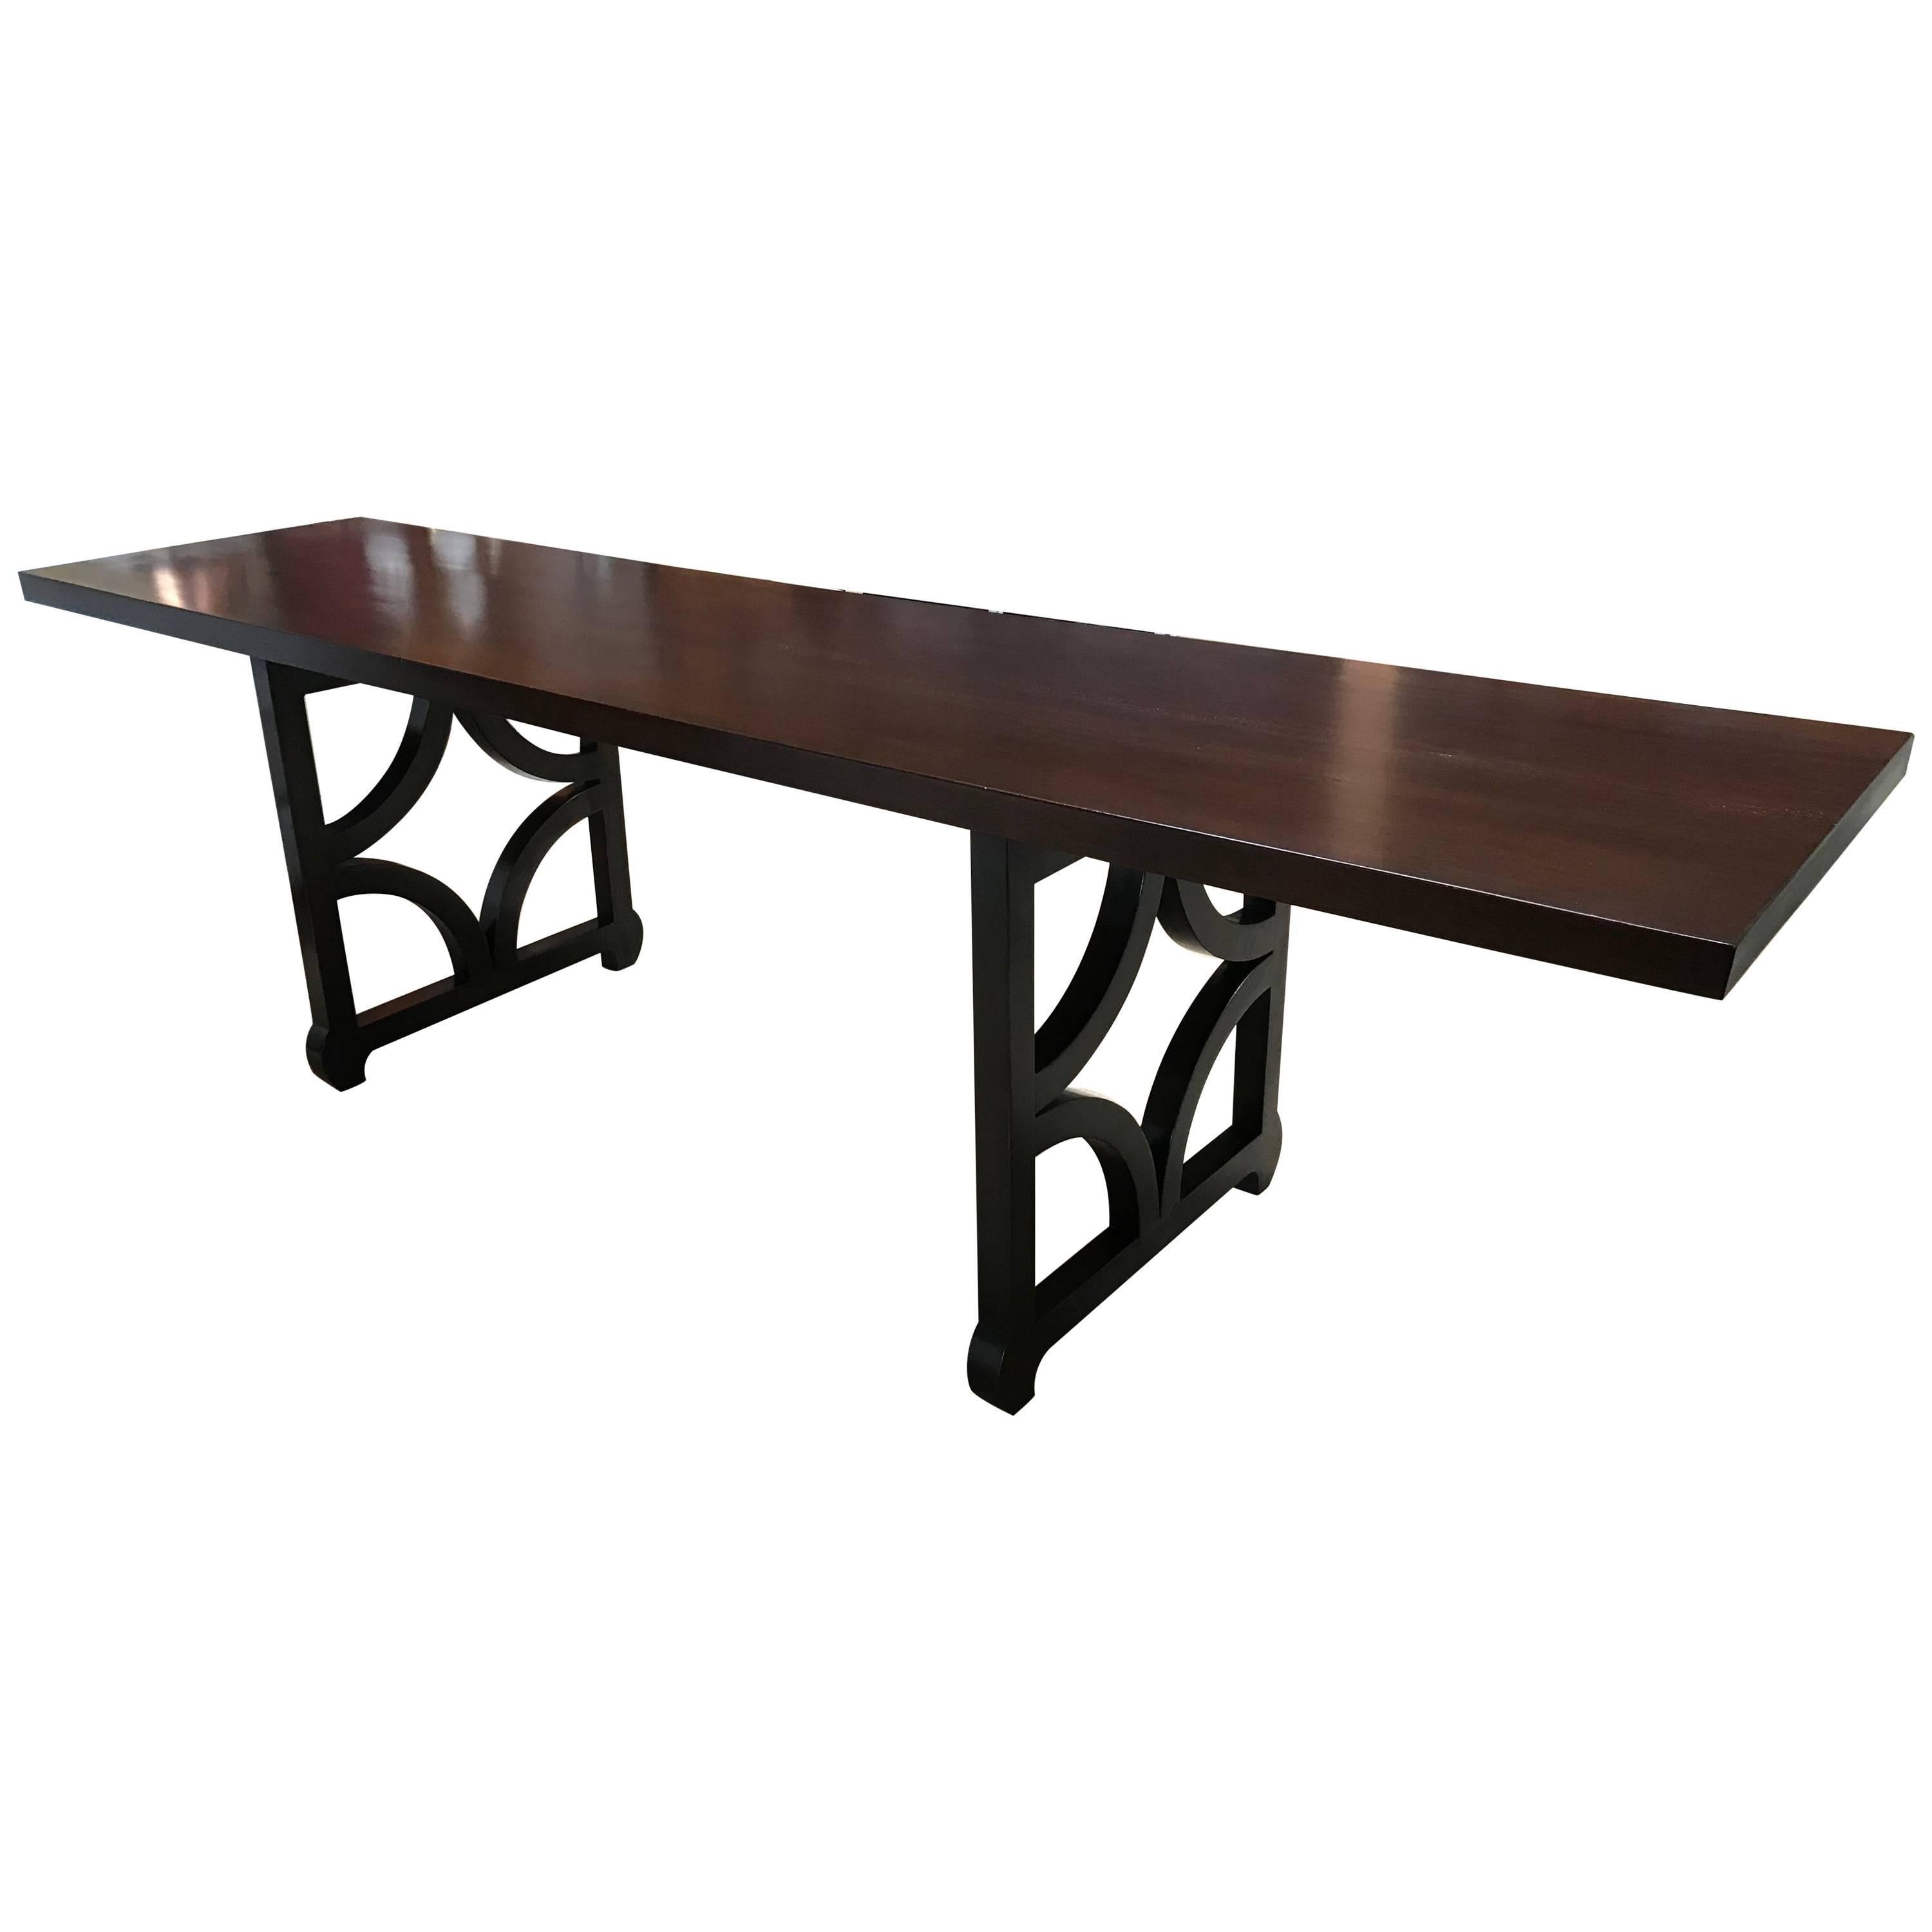 Sculptural Solid Mahogany Console Table by Doug Edge